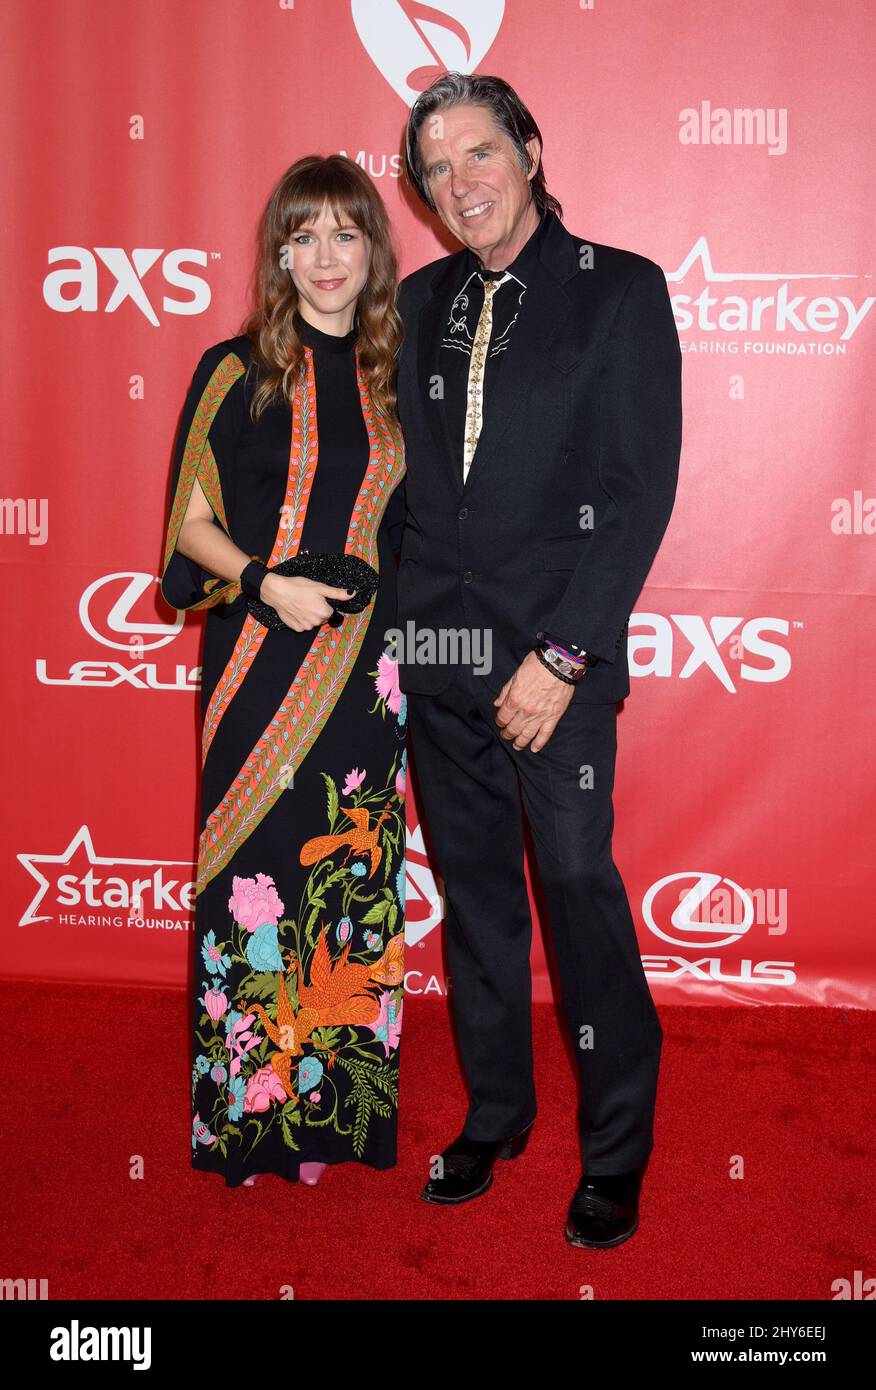 John Doe and Gigi Blair attending the 2015 MusiCares Person of the Year Gala honoring Bob Dylan, at the Los Angeles Convention Center in Los Angeles, California. Stock Photo